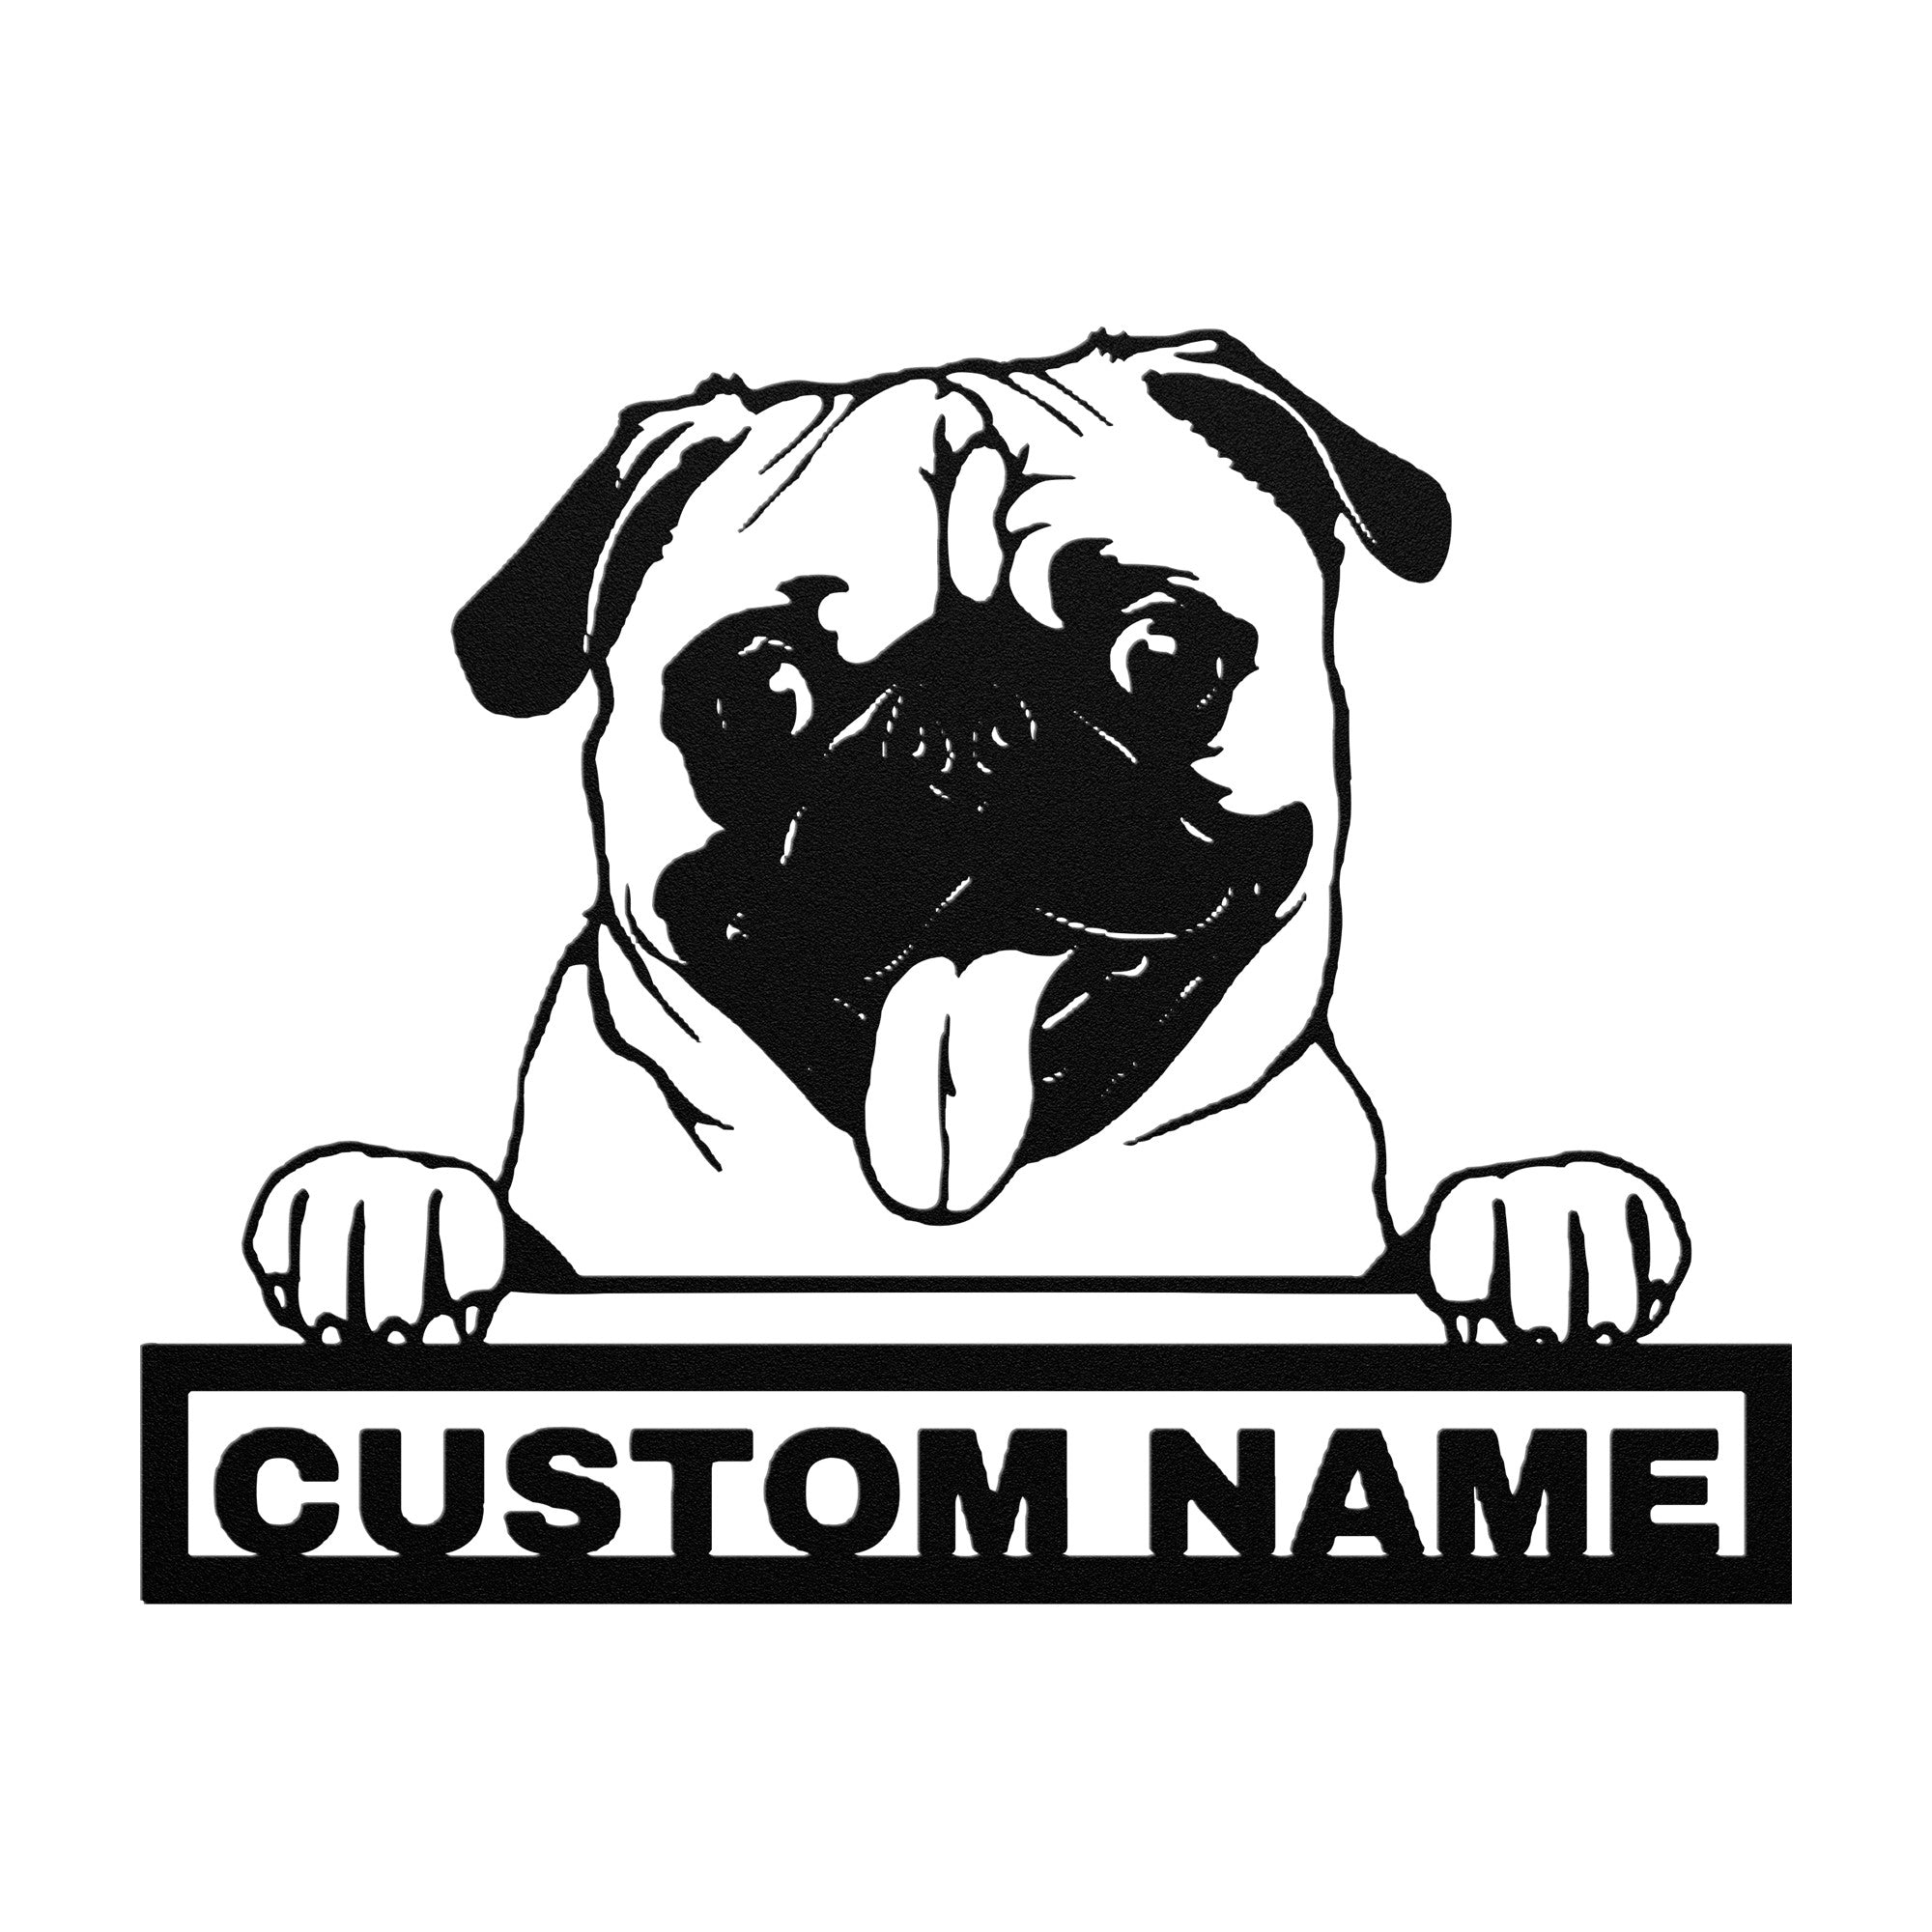 Personalized Pug Dog Metal Sign - Pug Custom Name Wall Decor, Metal Signs Customized Outdoor Indoor, Wall Art Gift For Pug Dog Lover